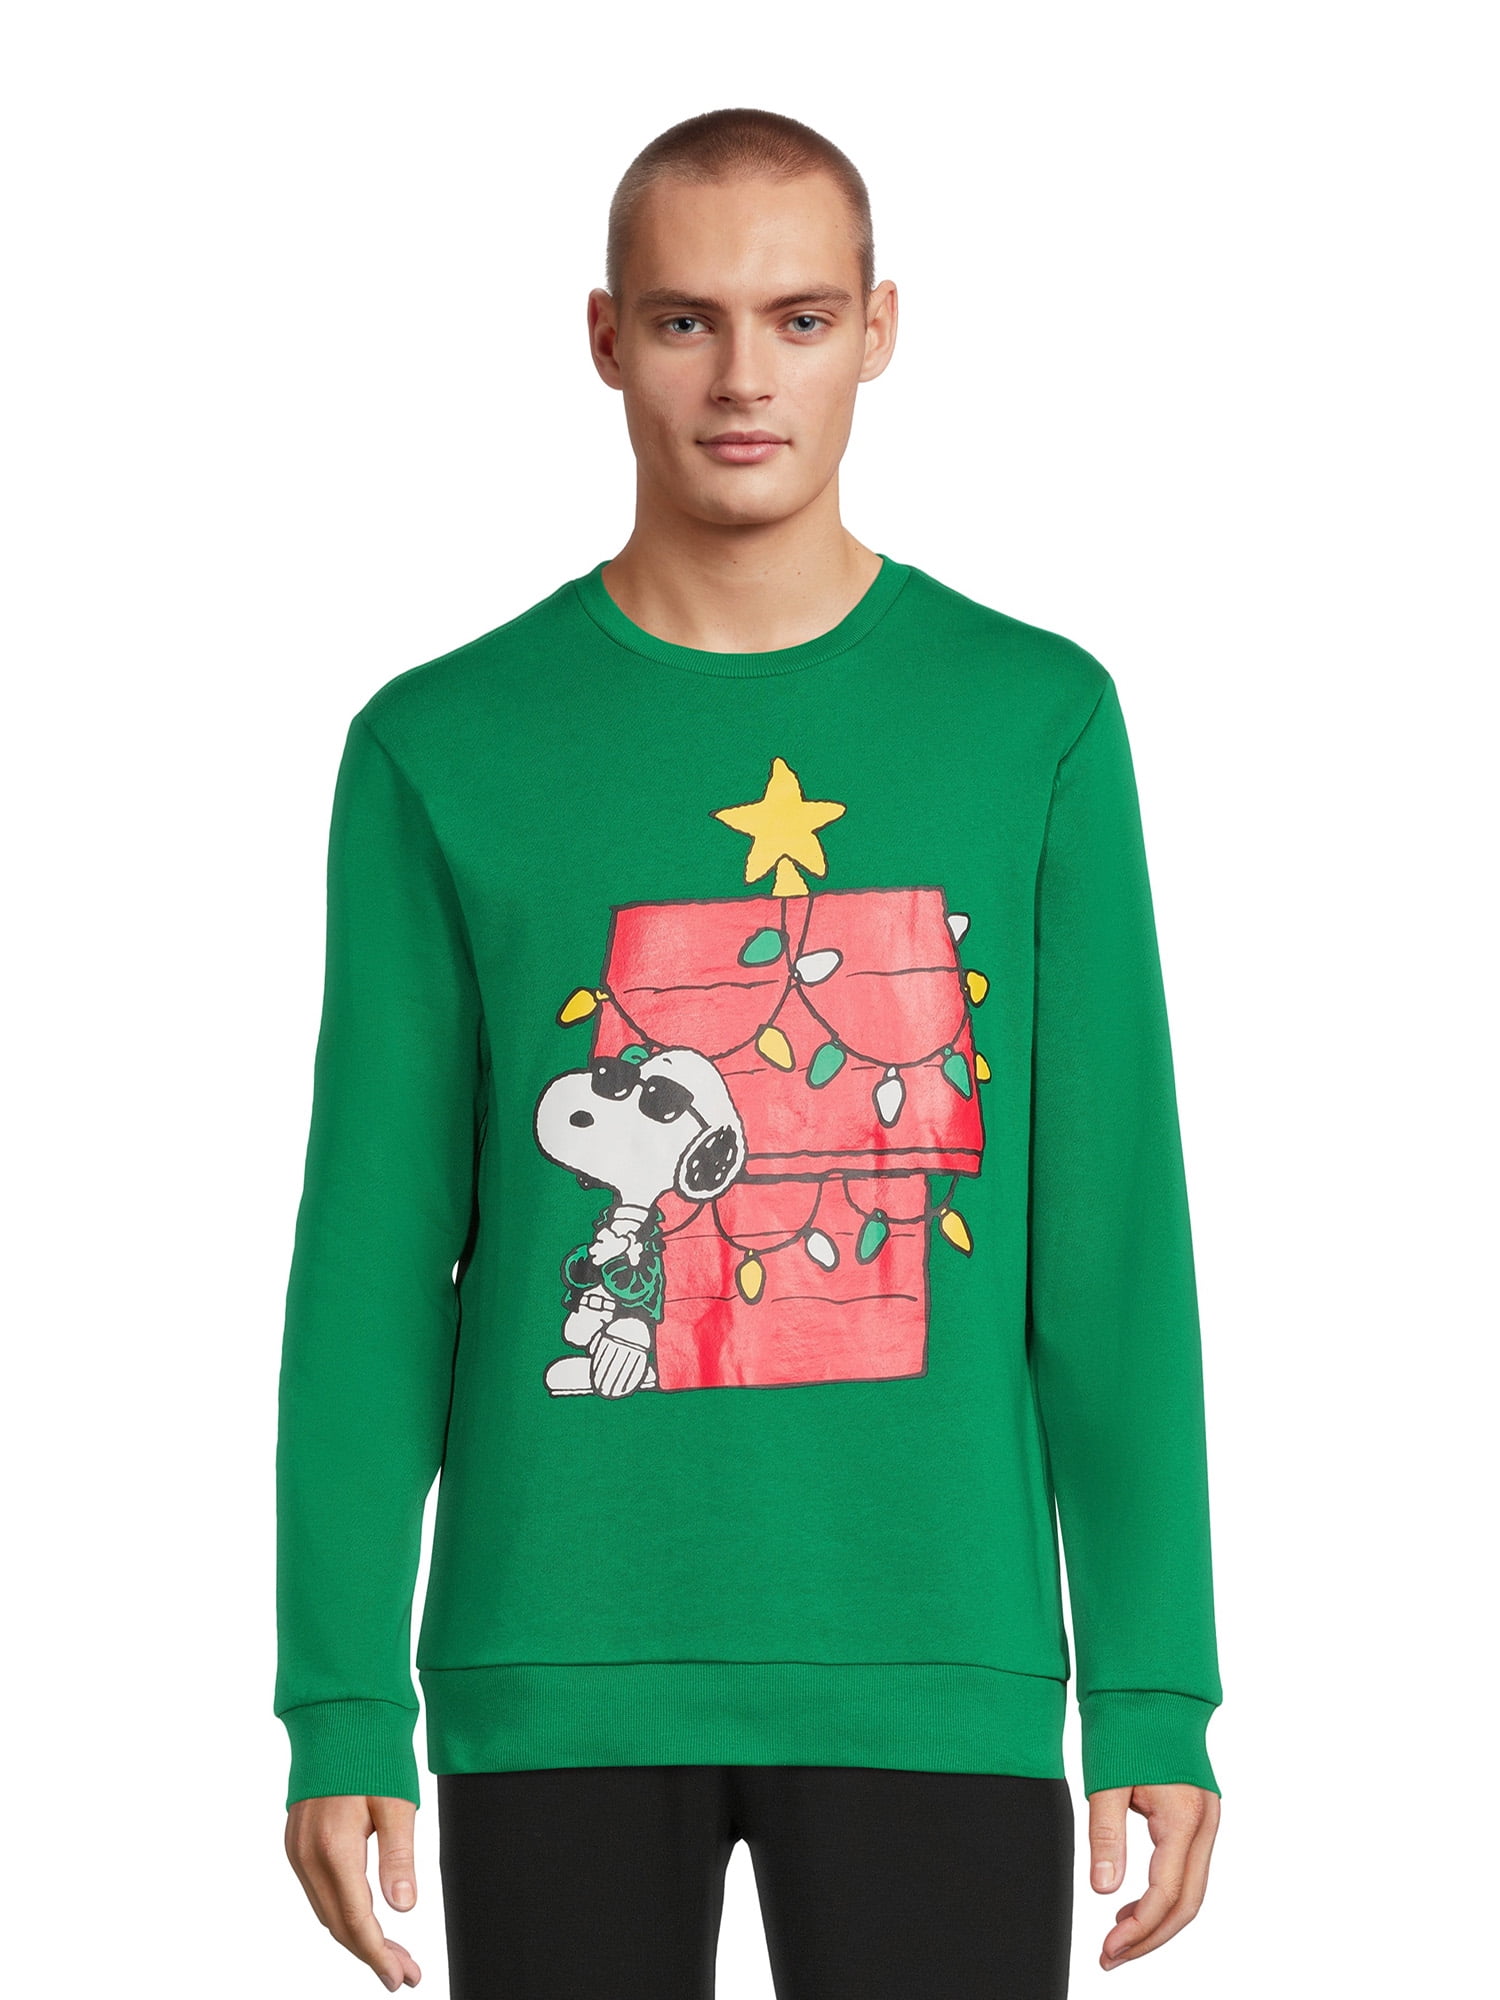 Peanuts Snoopy Men's Christmas Fleece Graphic Pullover, Sizes S-3XL